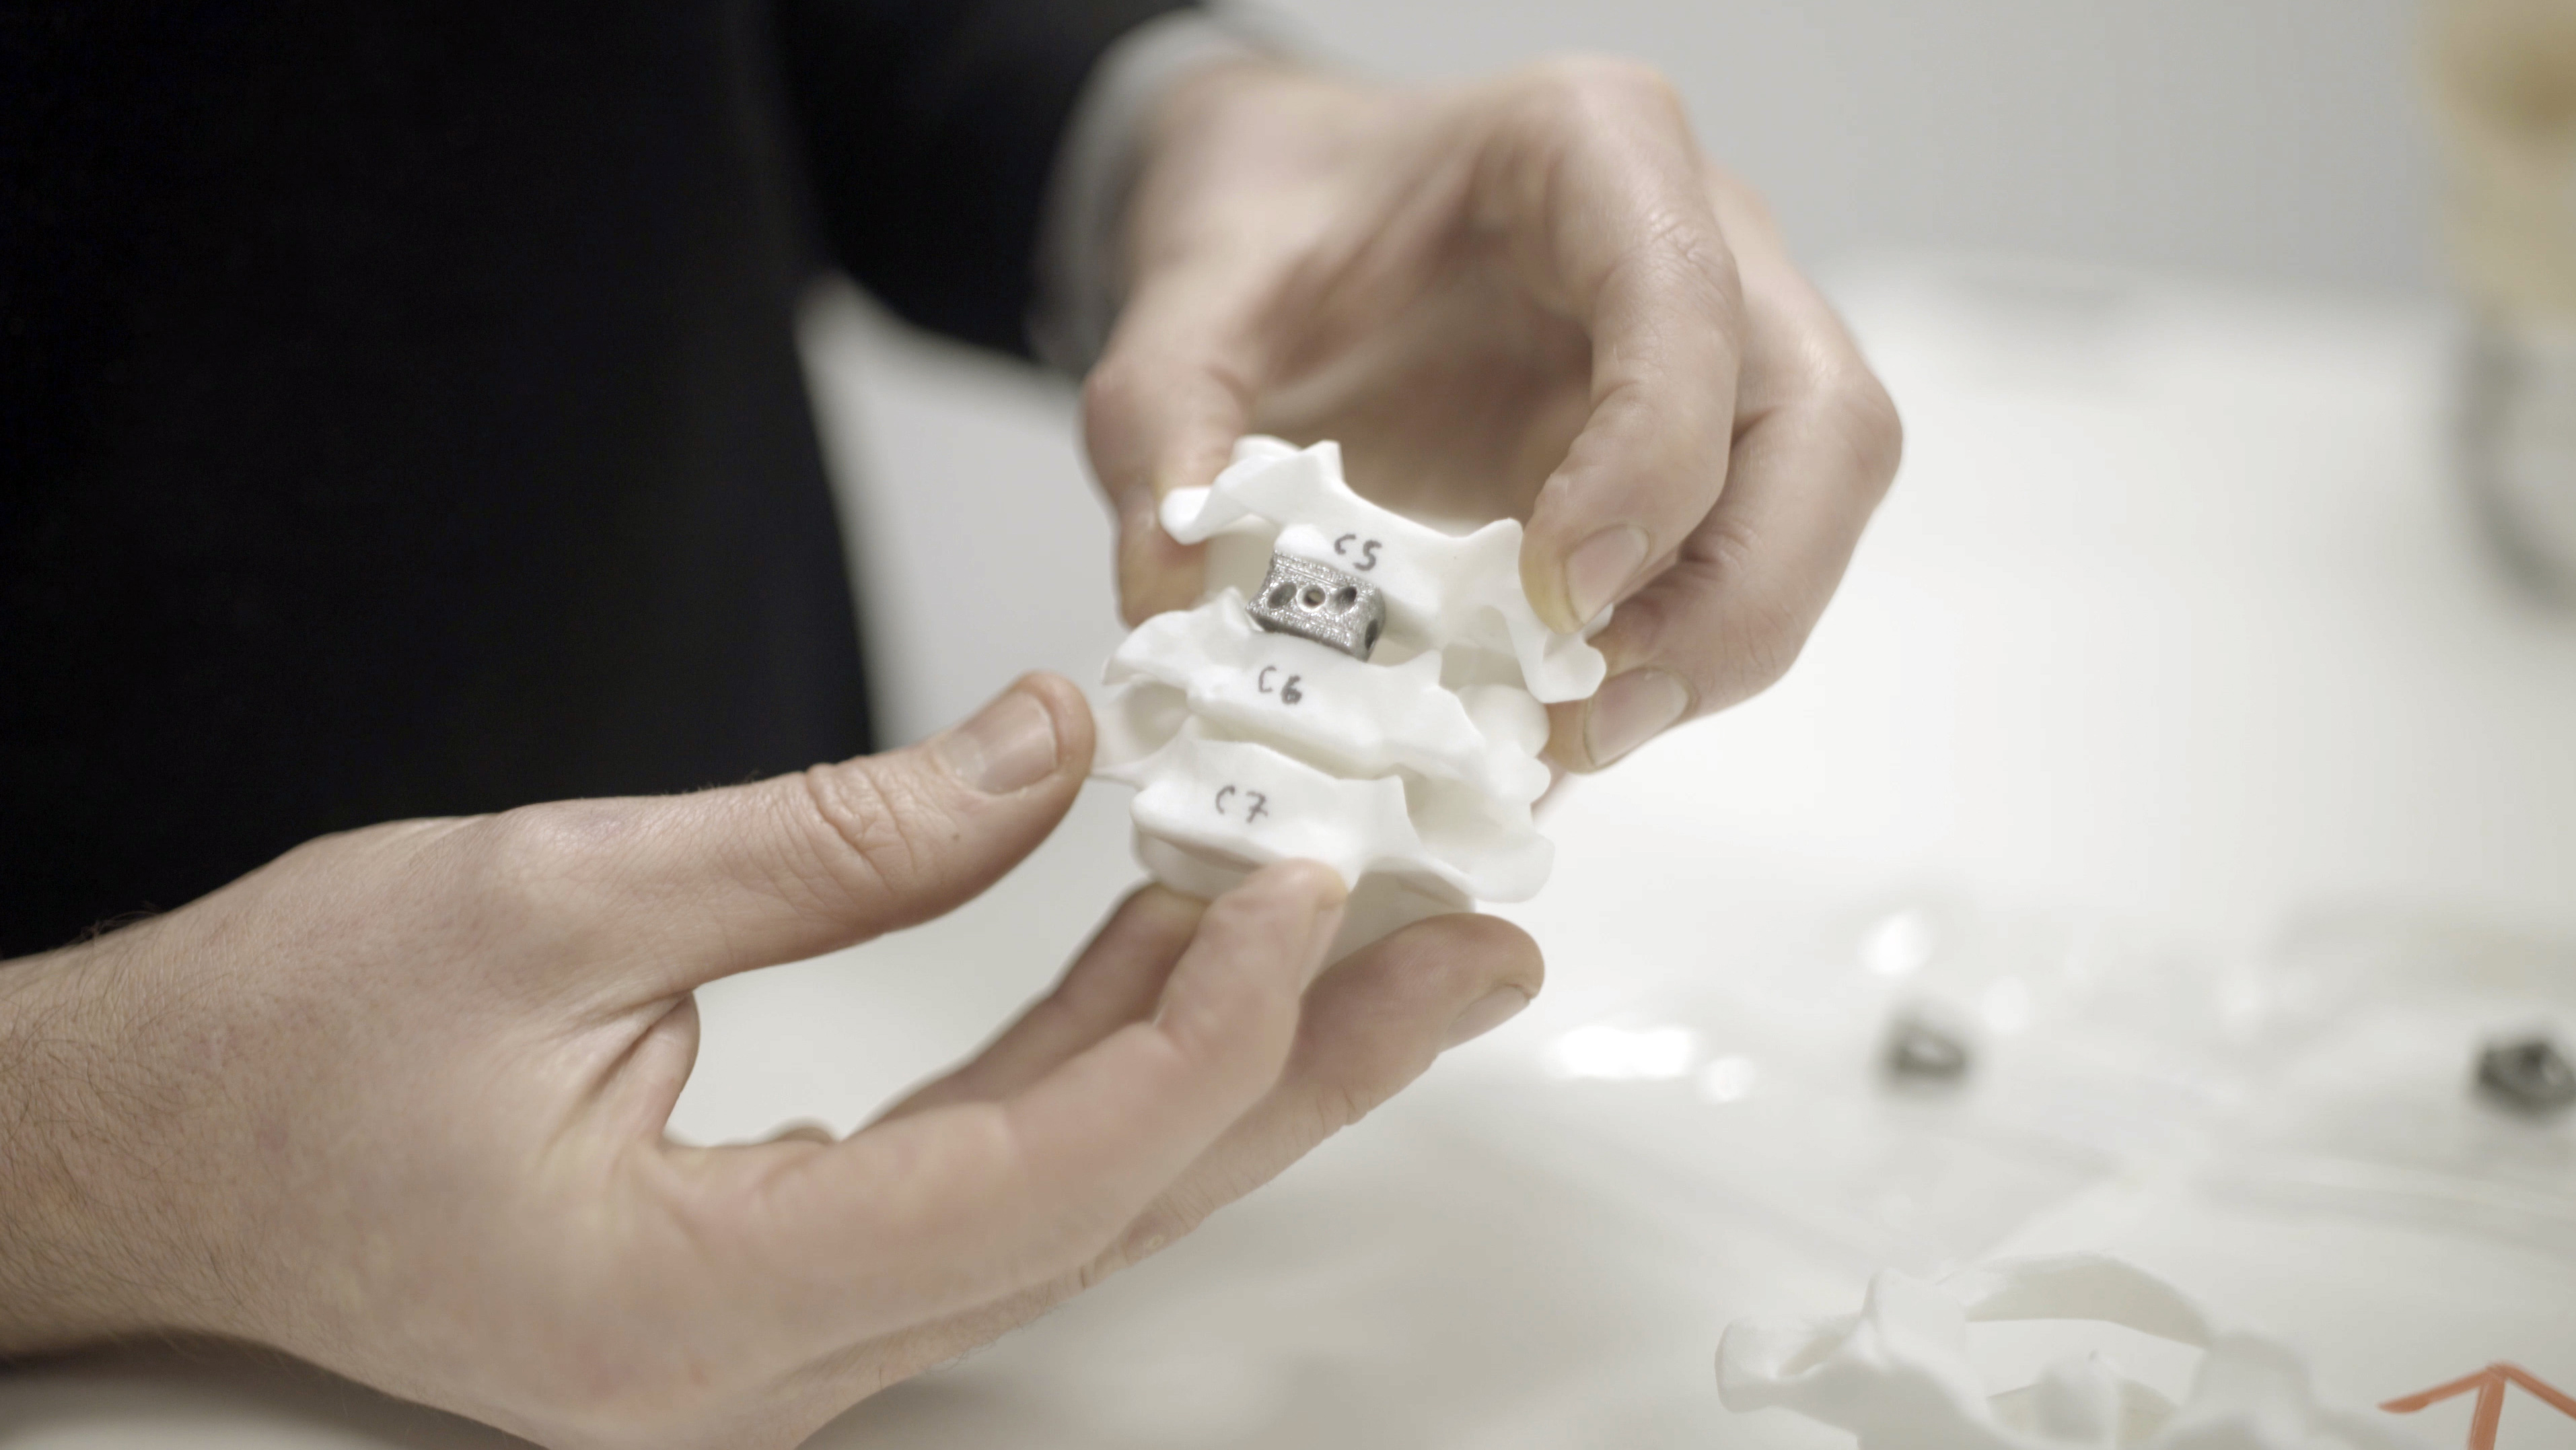 Renishaw, nTopology, and IMR Partner to 3D Print Spinal Implants